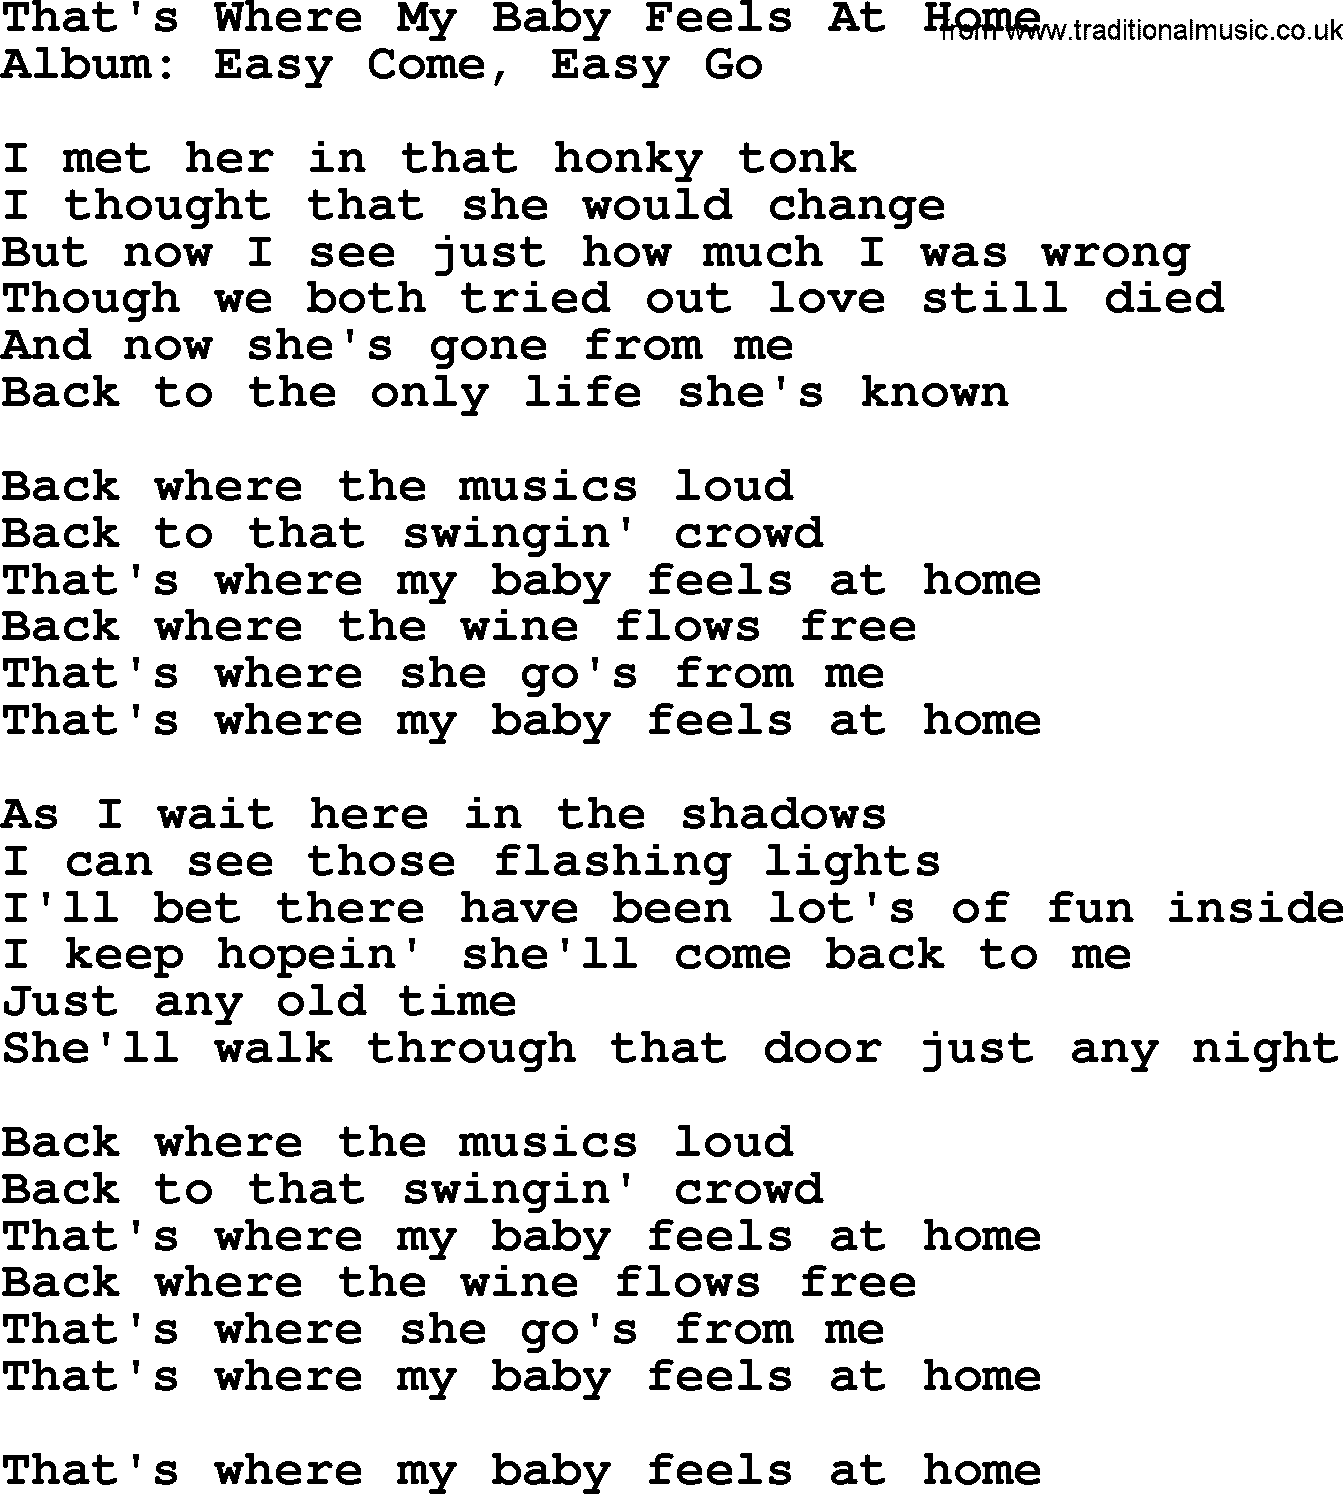 George Strait song: That's Where My Baby Feels At Home, lyrics